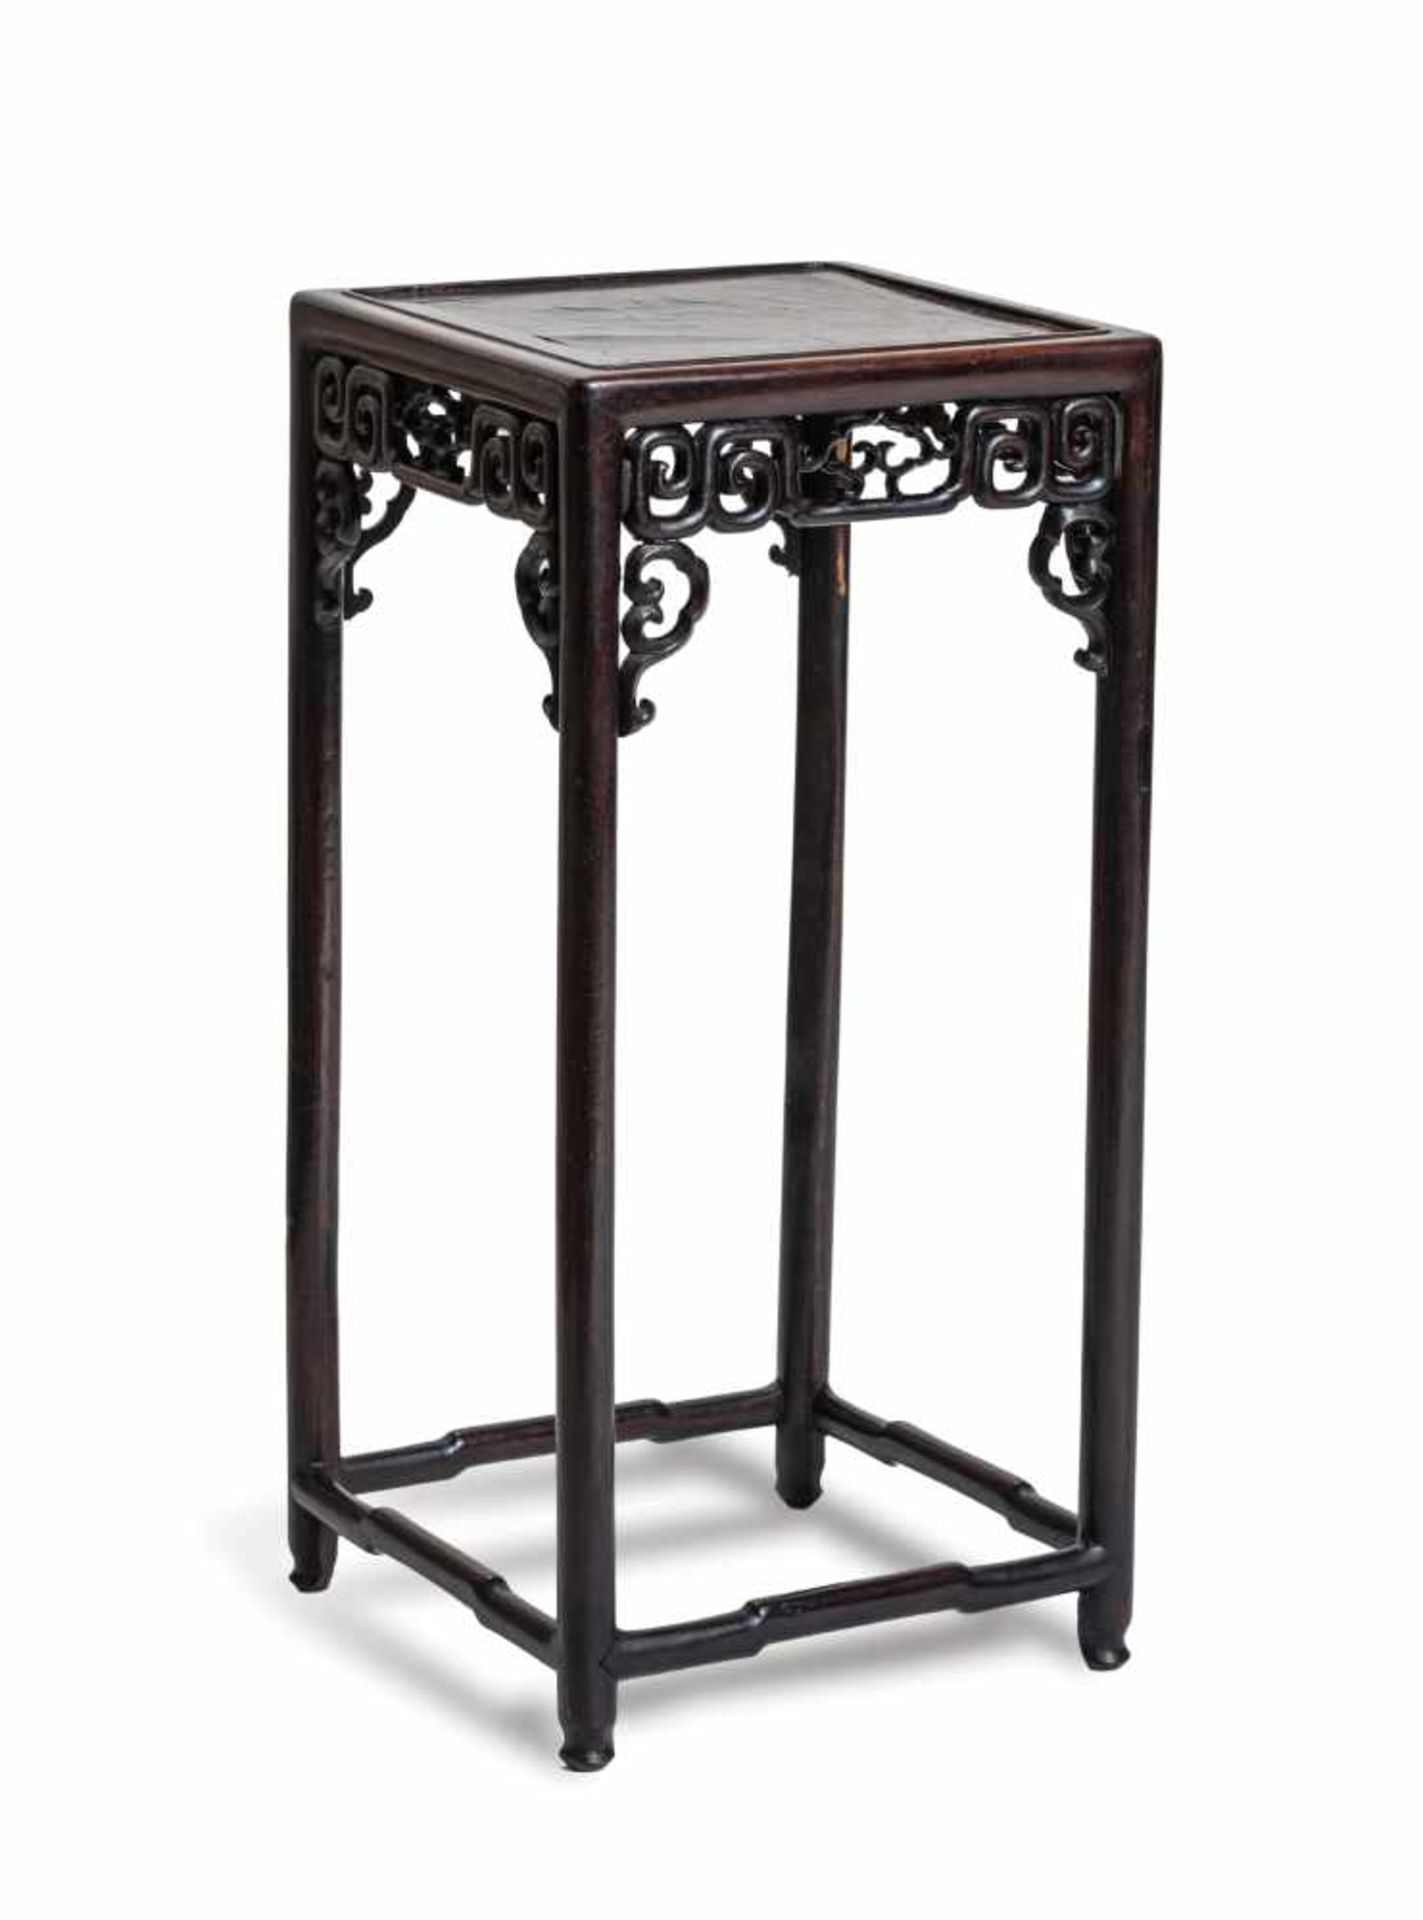 A RECTANGULAR WOODEN FLOWER STAND, QING DYNASTY Made of several jointed pieces of darker hardwood,